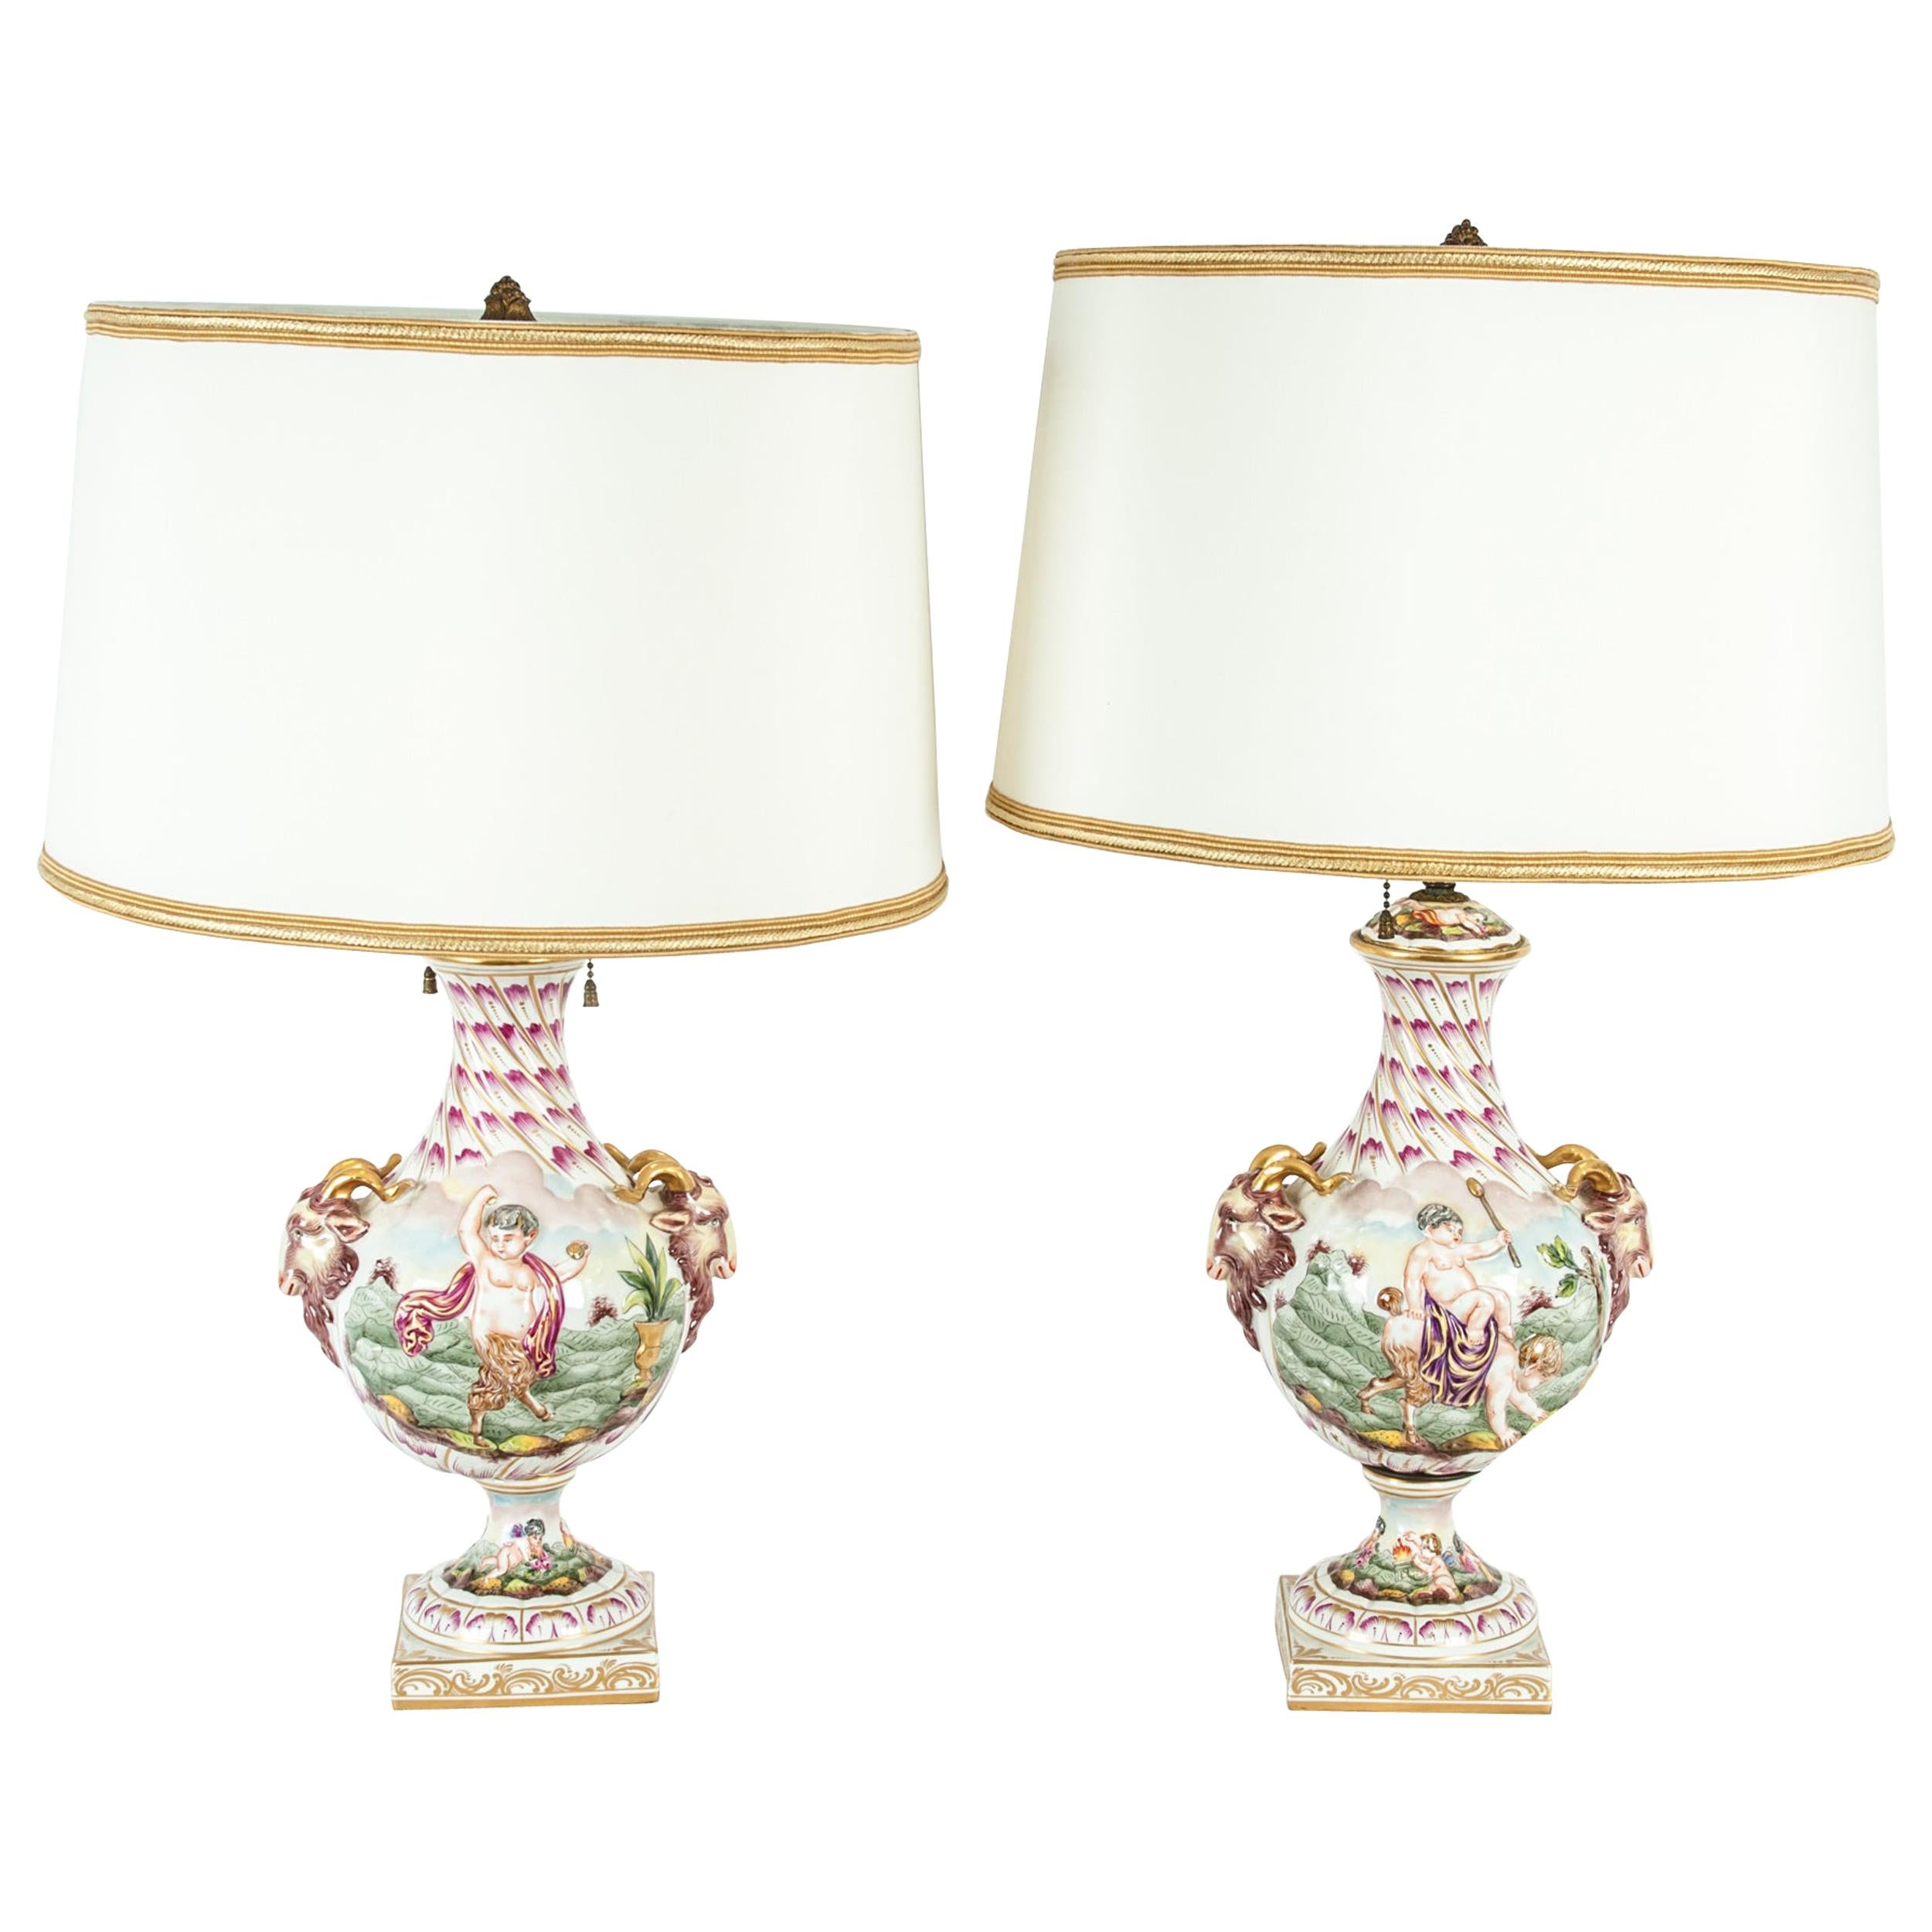 Early 20th Century Porcelain Pair of Table Lamp